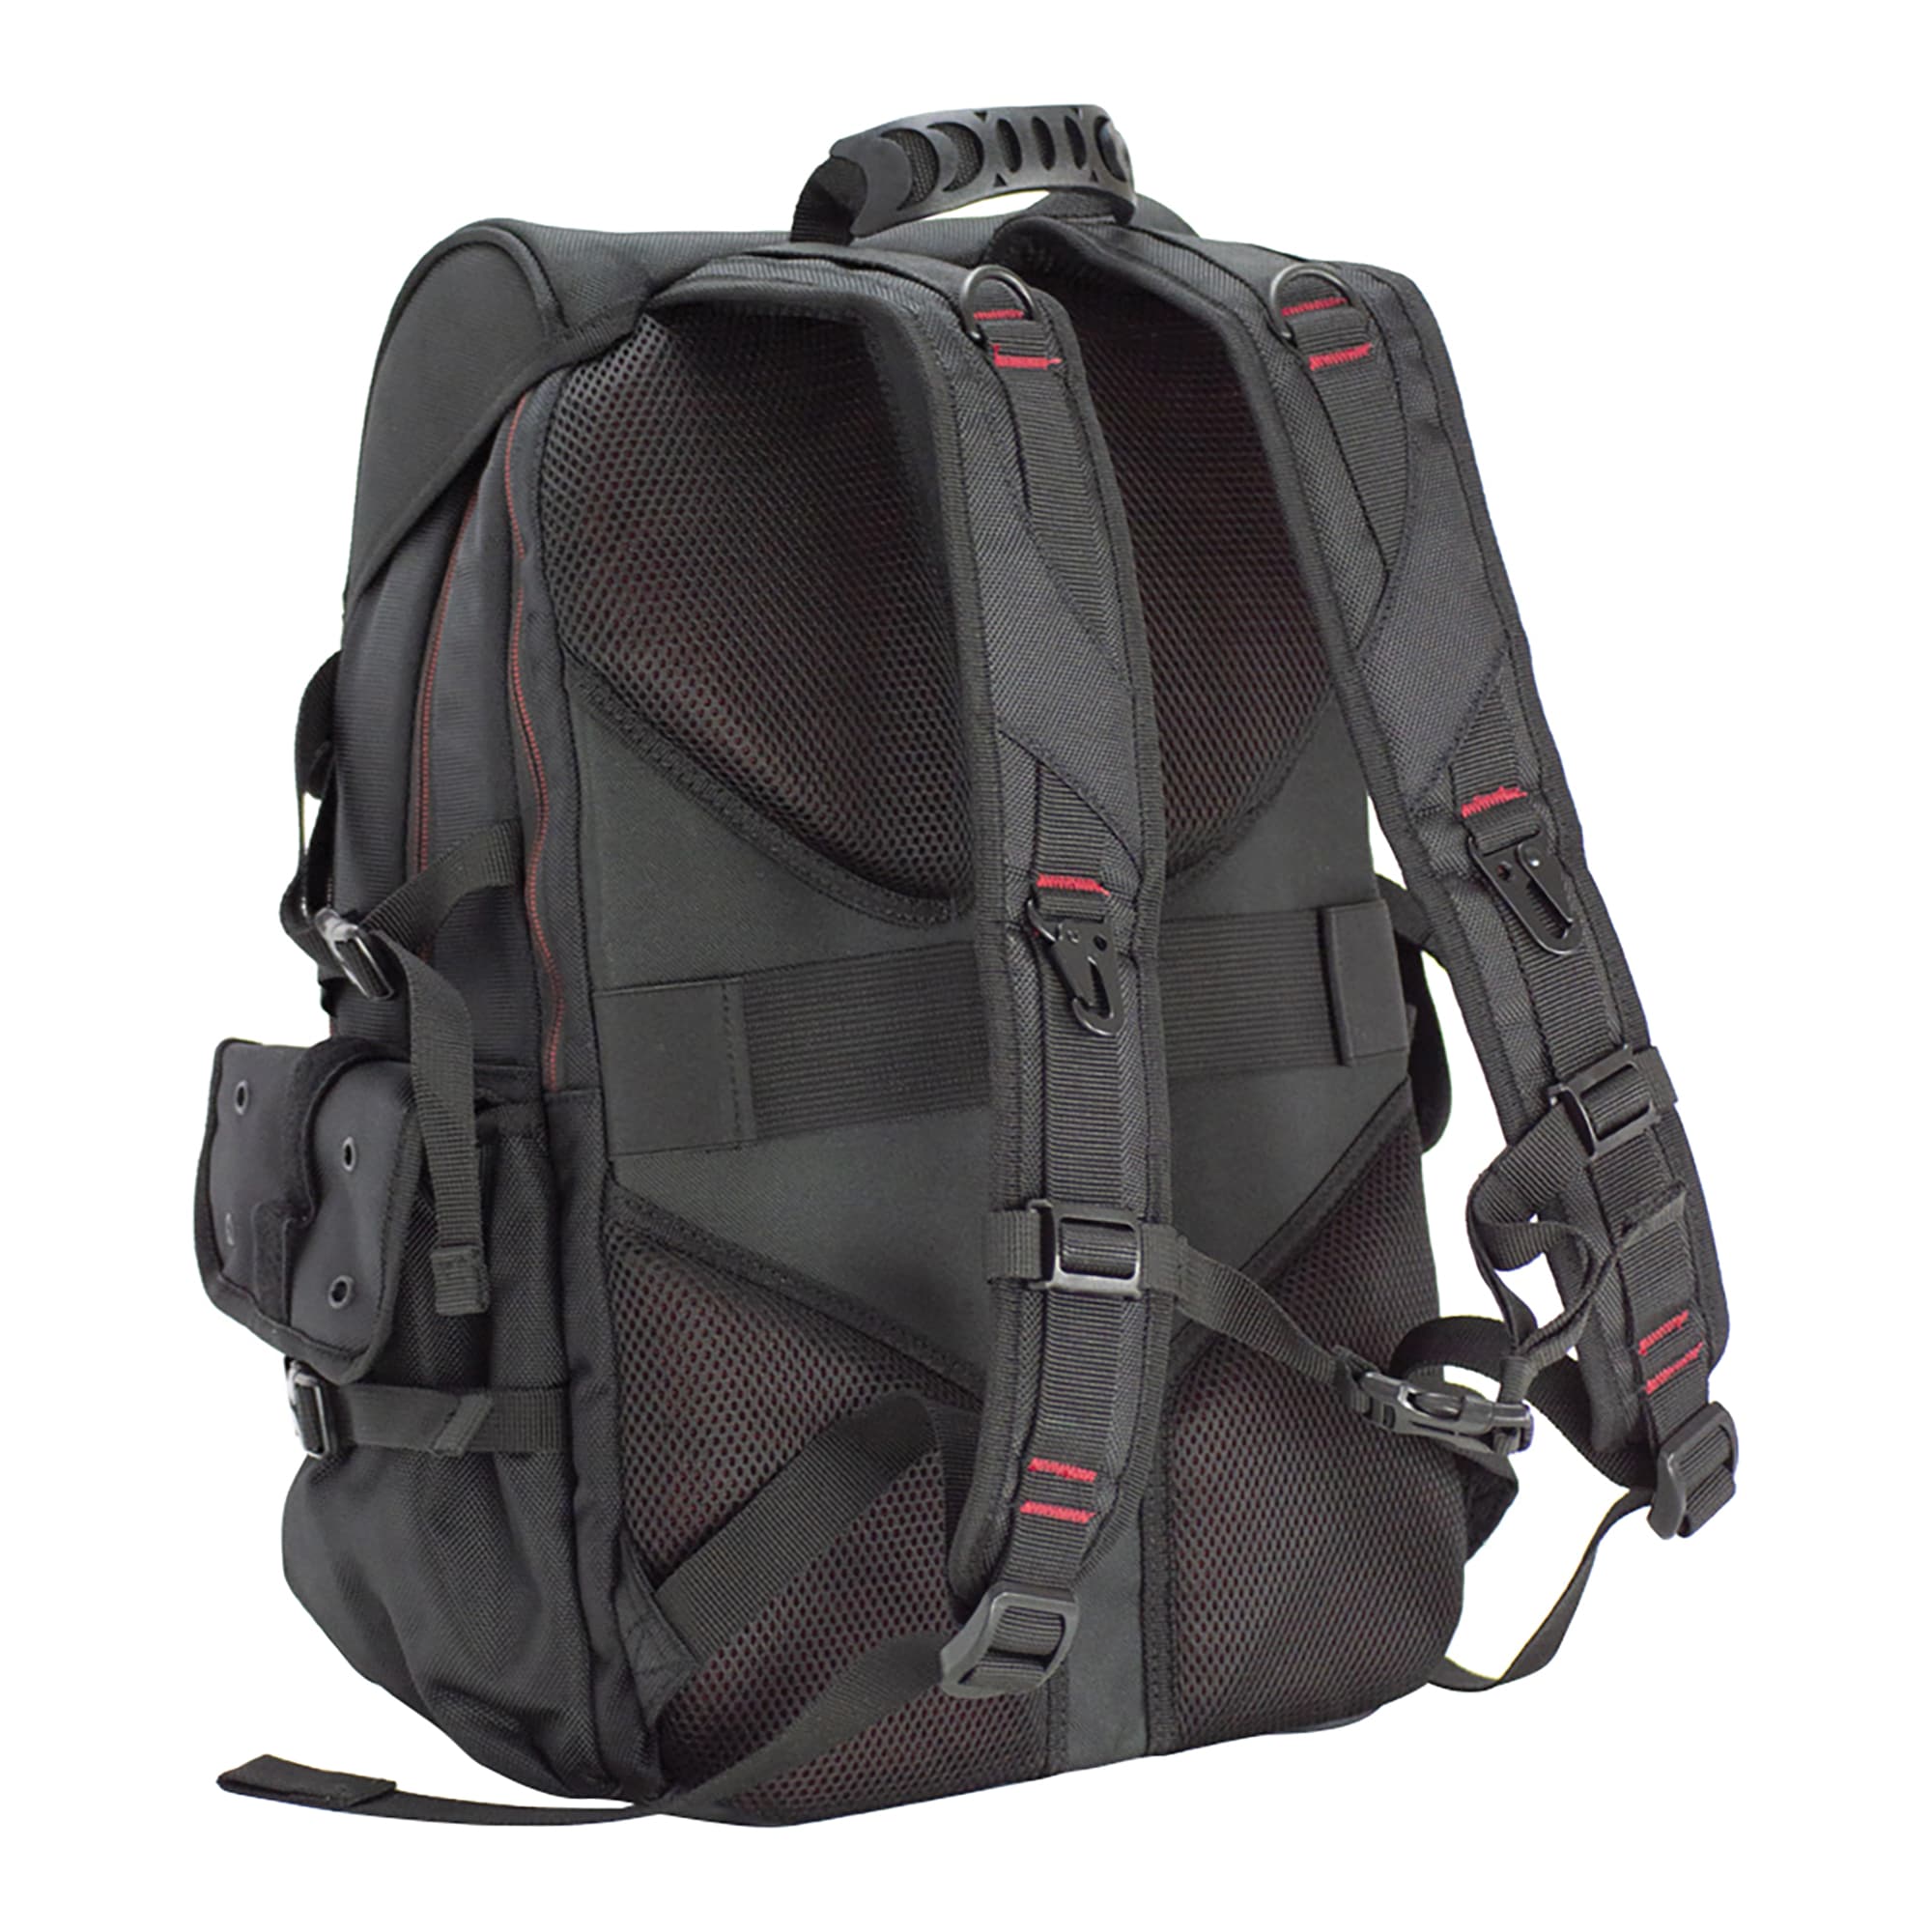 CORE ROUND BACKPACK NYLON in black